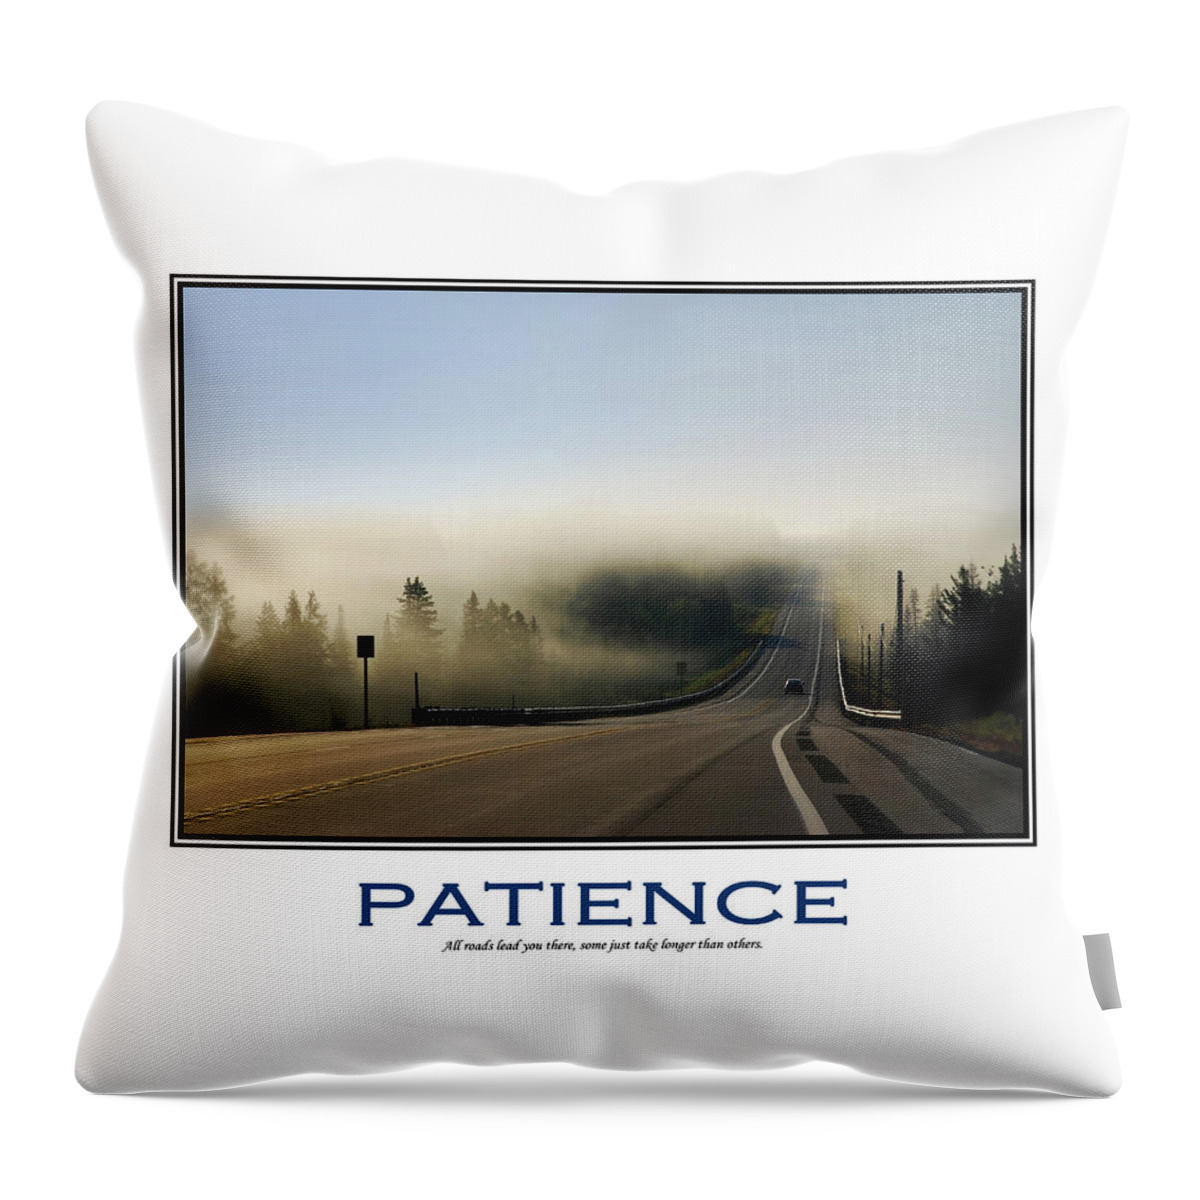 Inspirational Throw Pillow featuring the mixed media Patience Inspirational Motivational Poster Art by Christina Rollo